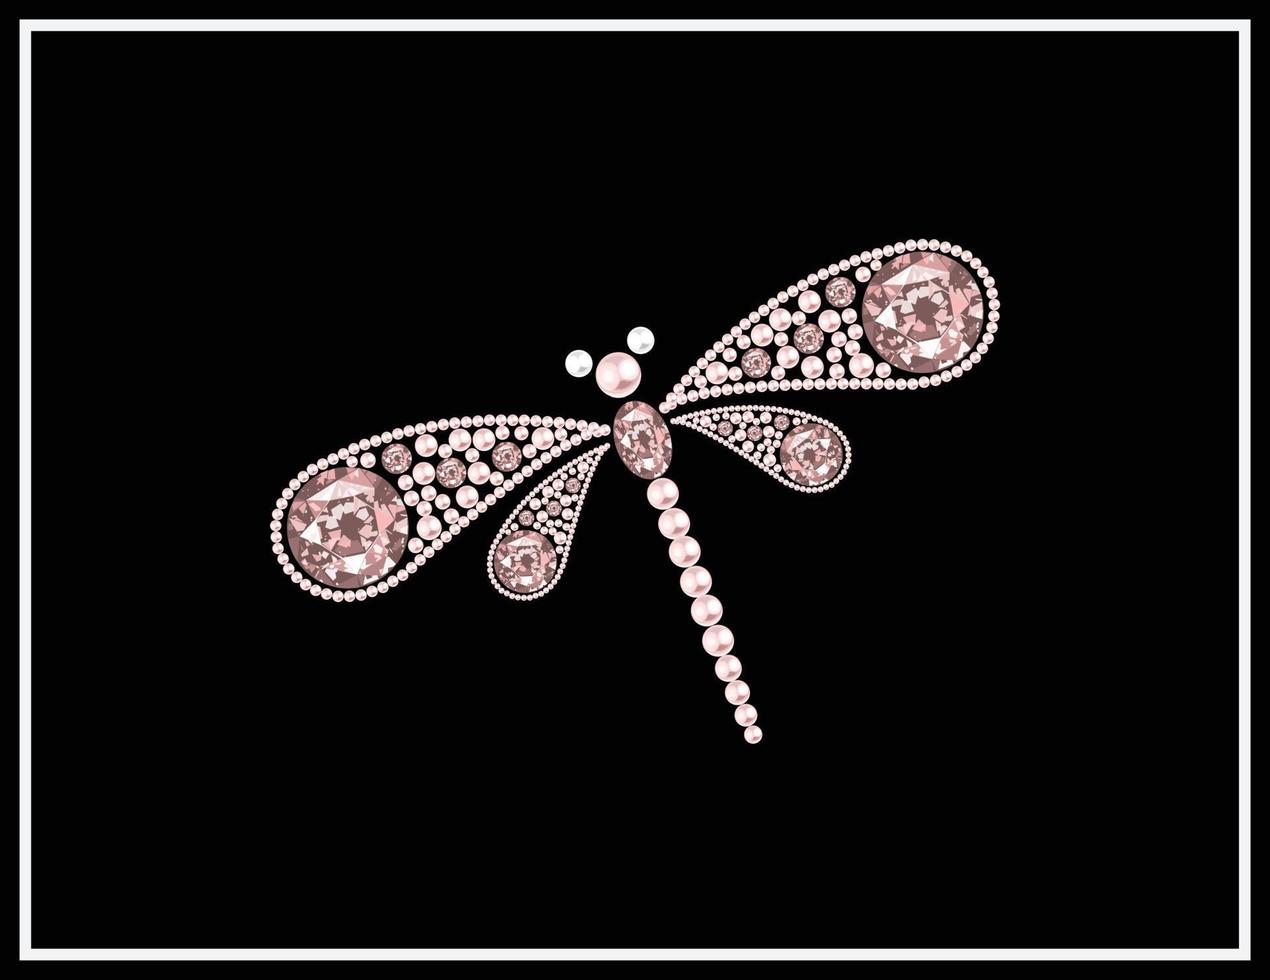 Dragonfly vector set made with pearl and diamond rhinestone